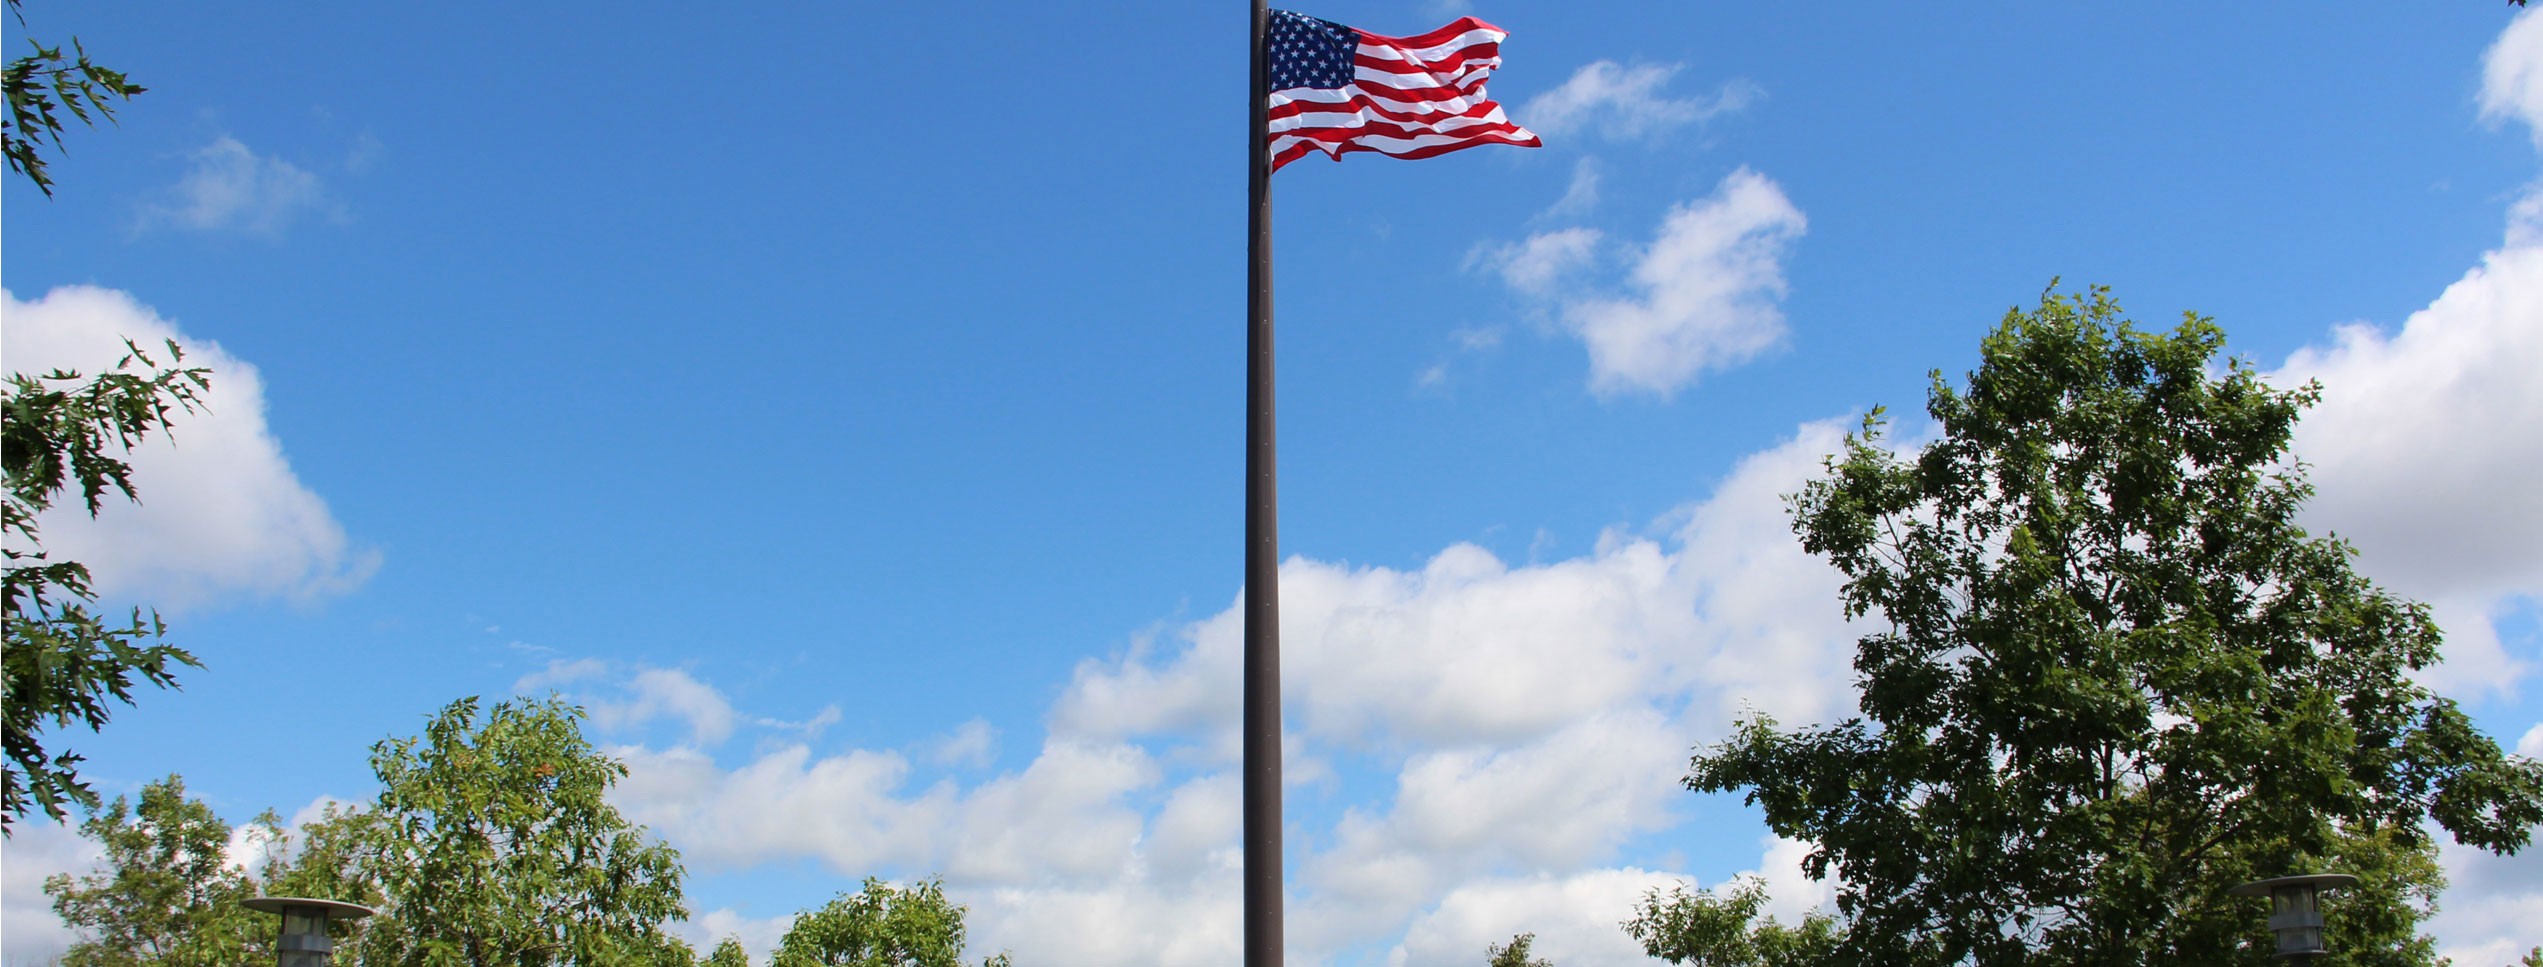 Flagpole with American flag